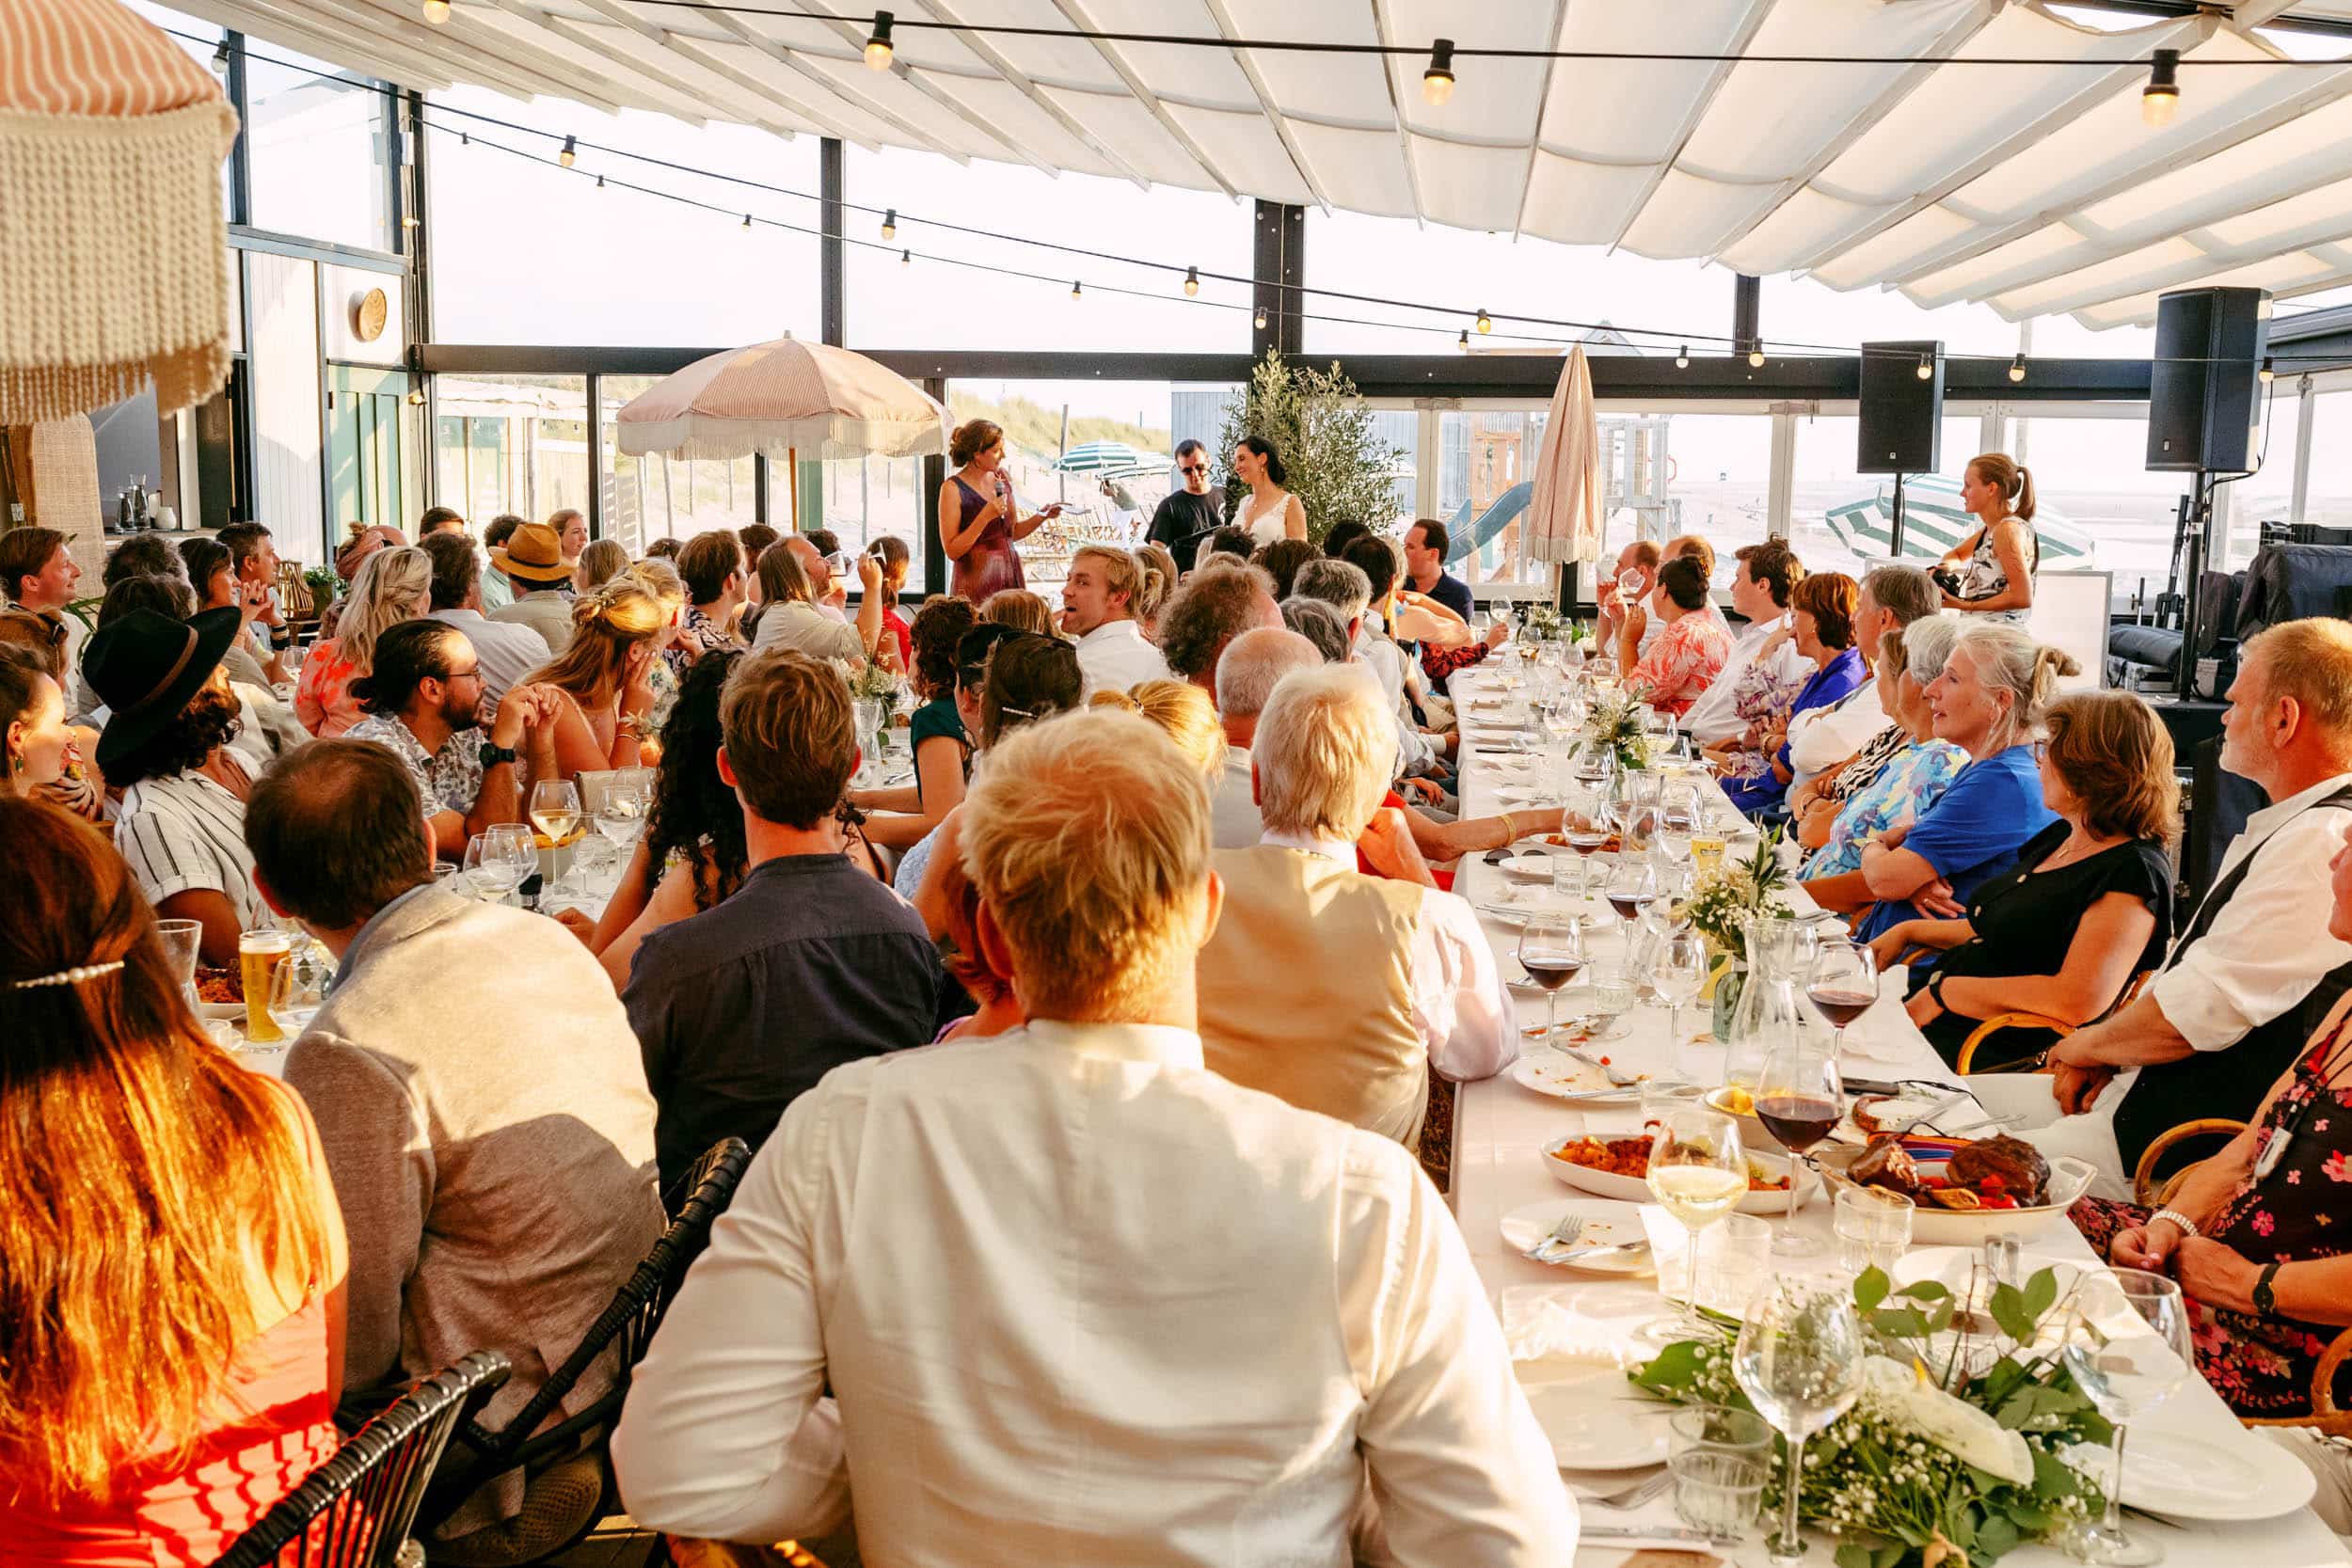 A large group of people sit at tables during a wedding reception at a beach club.